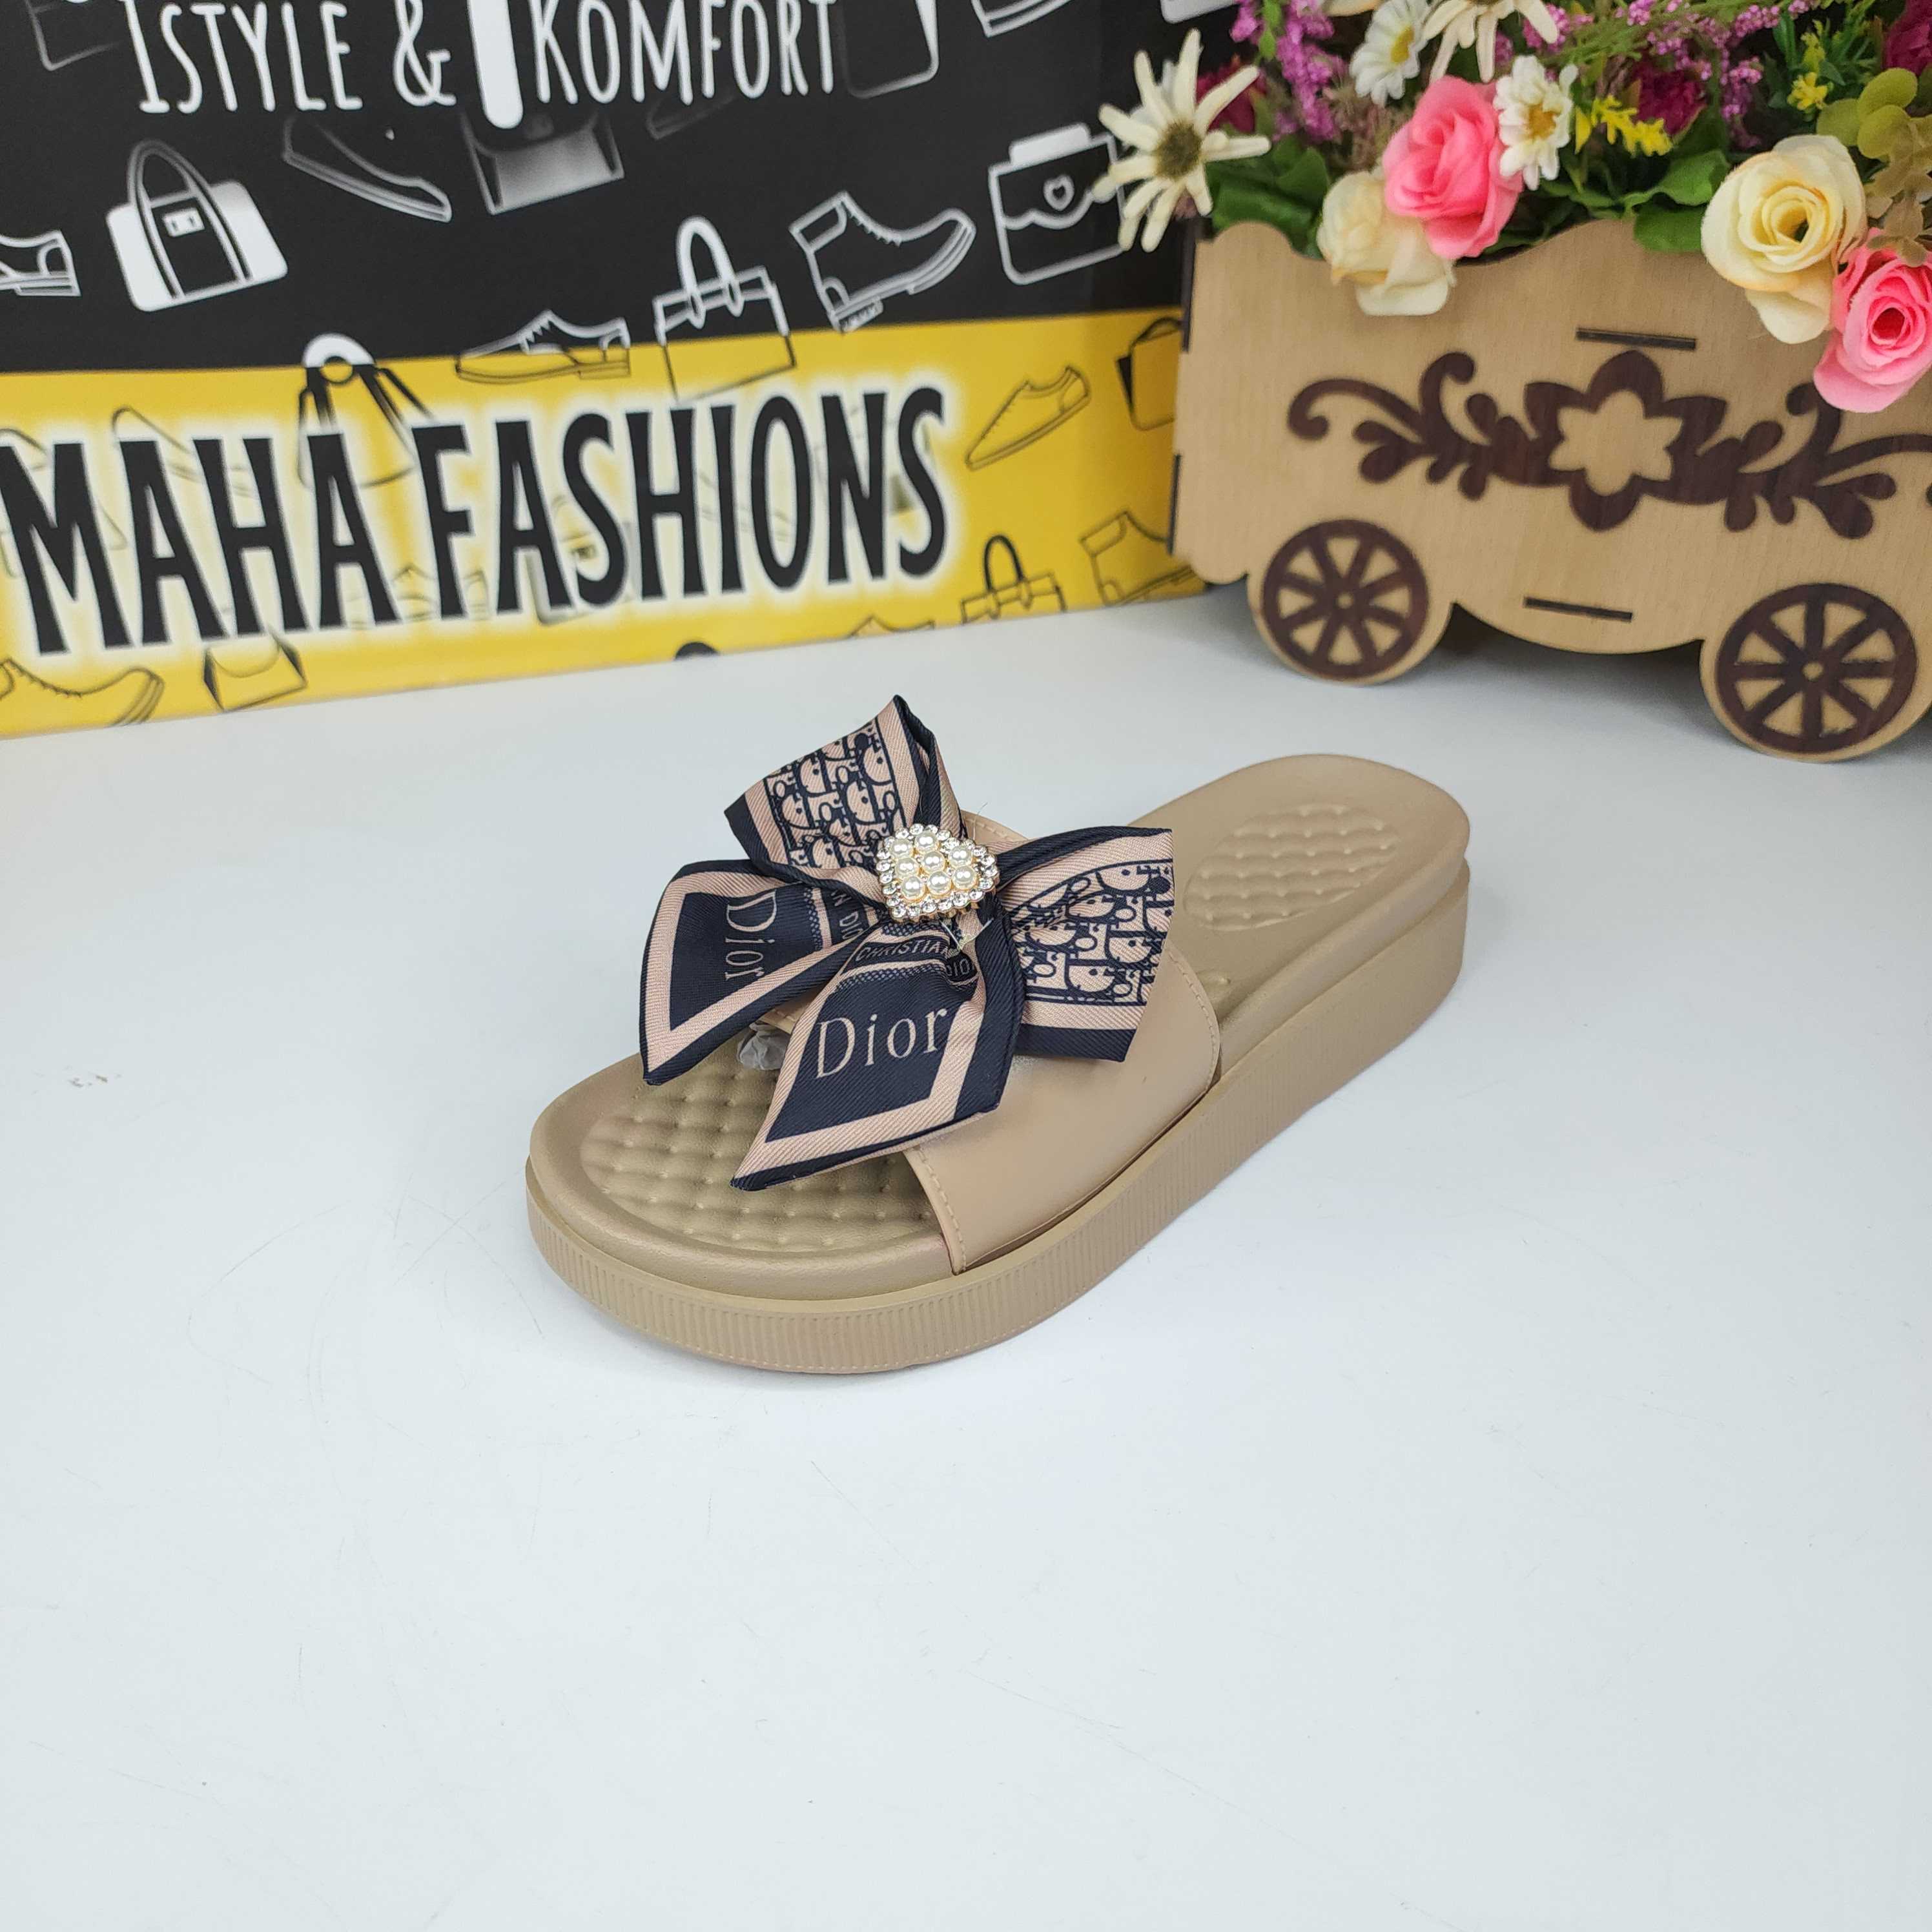 Brown Bow Slippers - Maha fashions -  